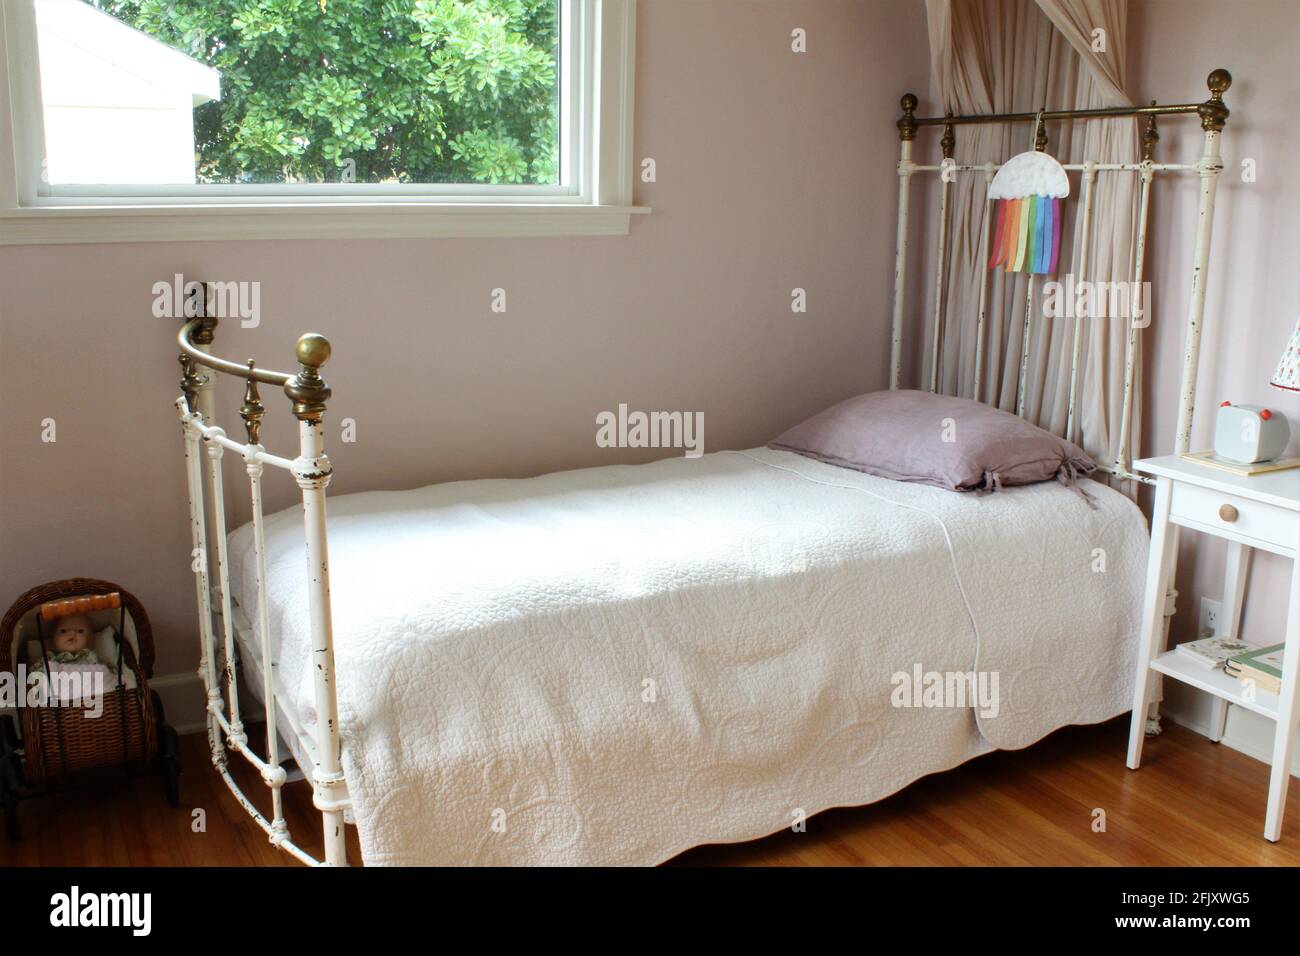 Girl's bedroom. Iron frame canopy bed with small desk lamp on a night stand. A small baby carriage is in the room for play. Big open space window Stock Photo